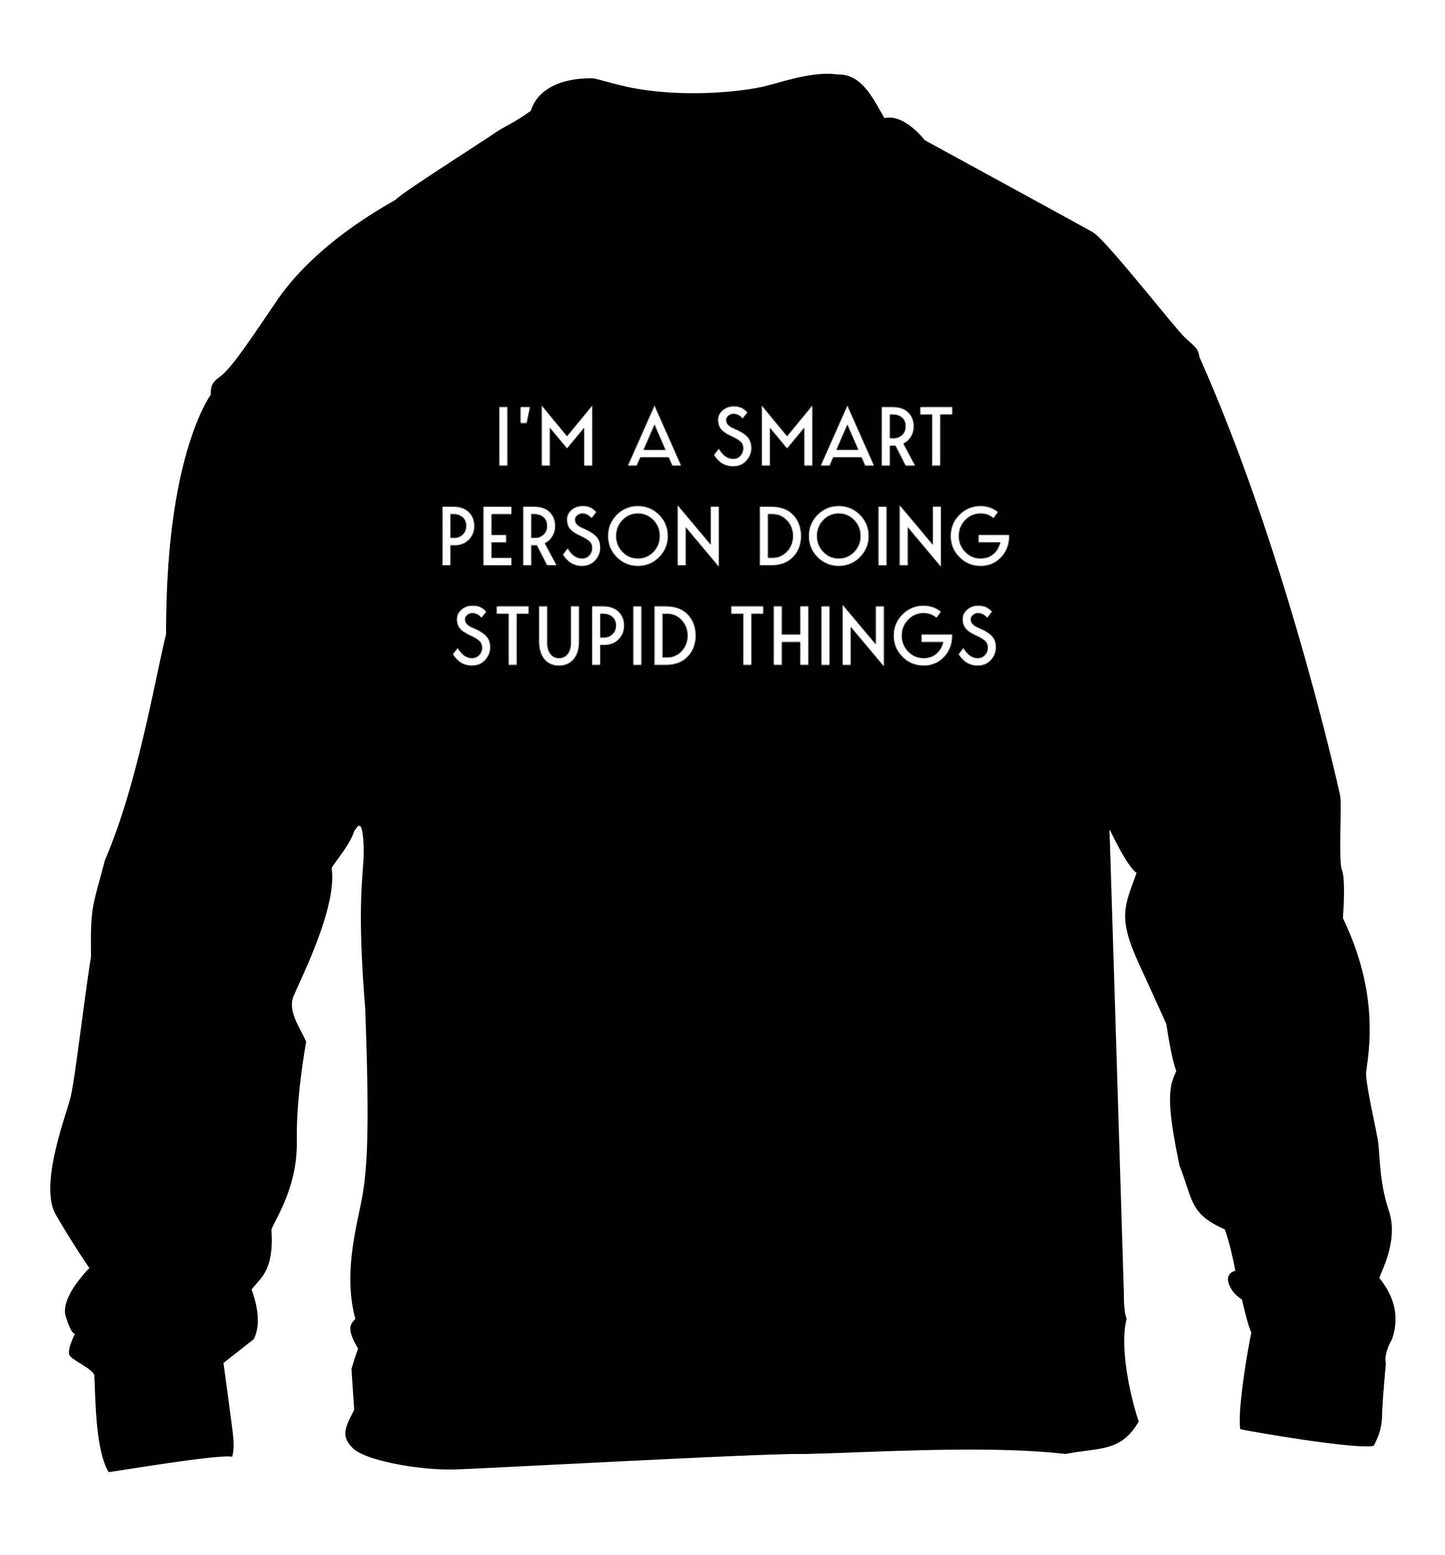 I'm a smart person doing stupid things children's black sweater 12-13 Years